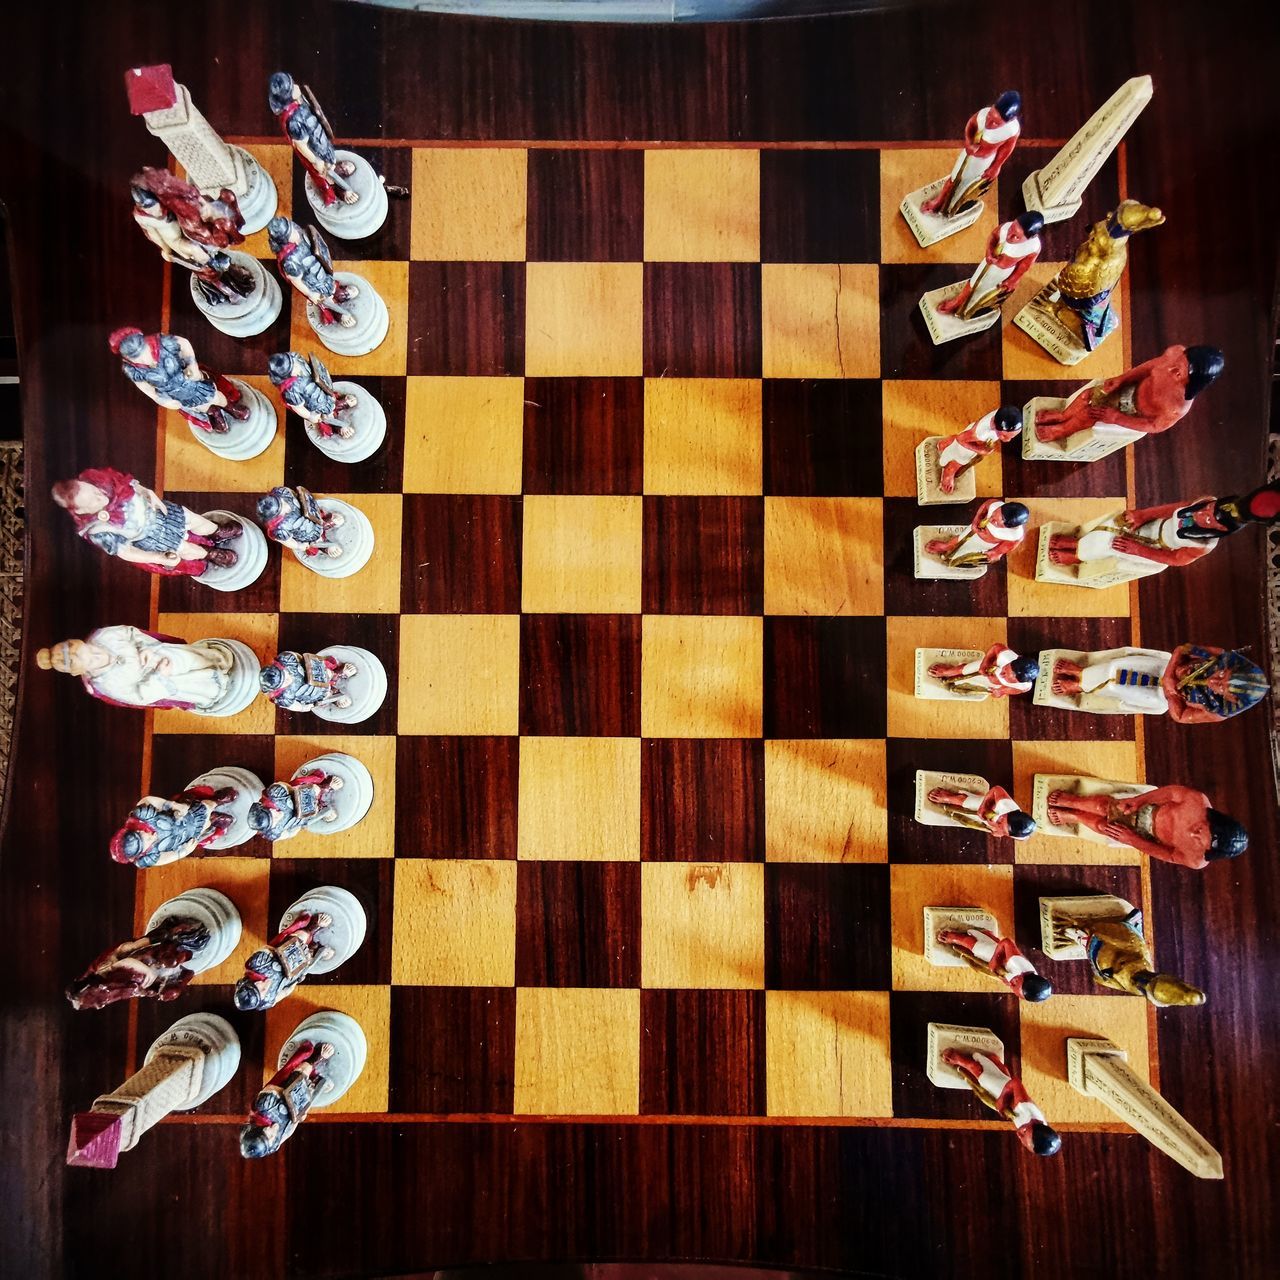 DIRECTLY ABOVE SHOT OF CHESS ON TABLE